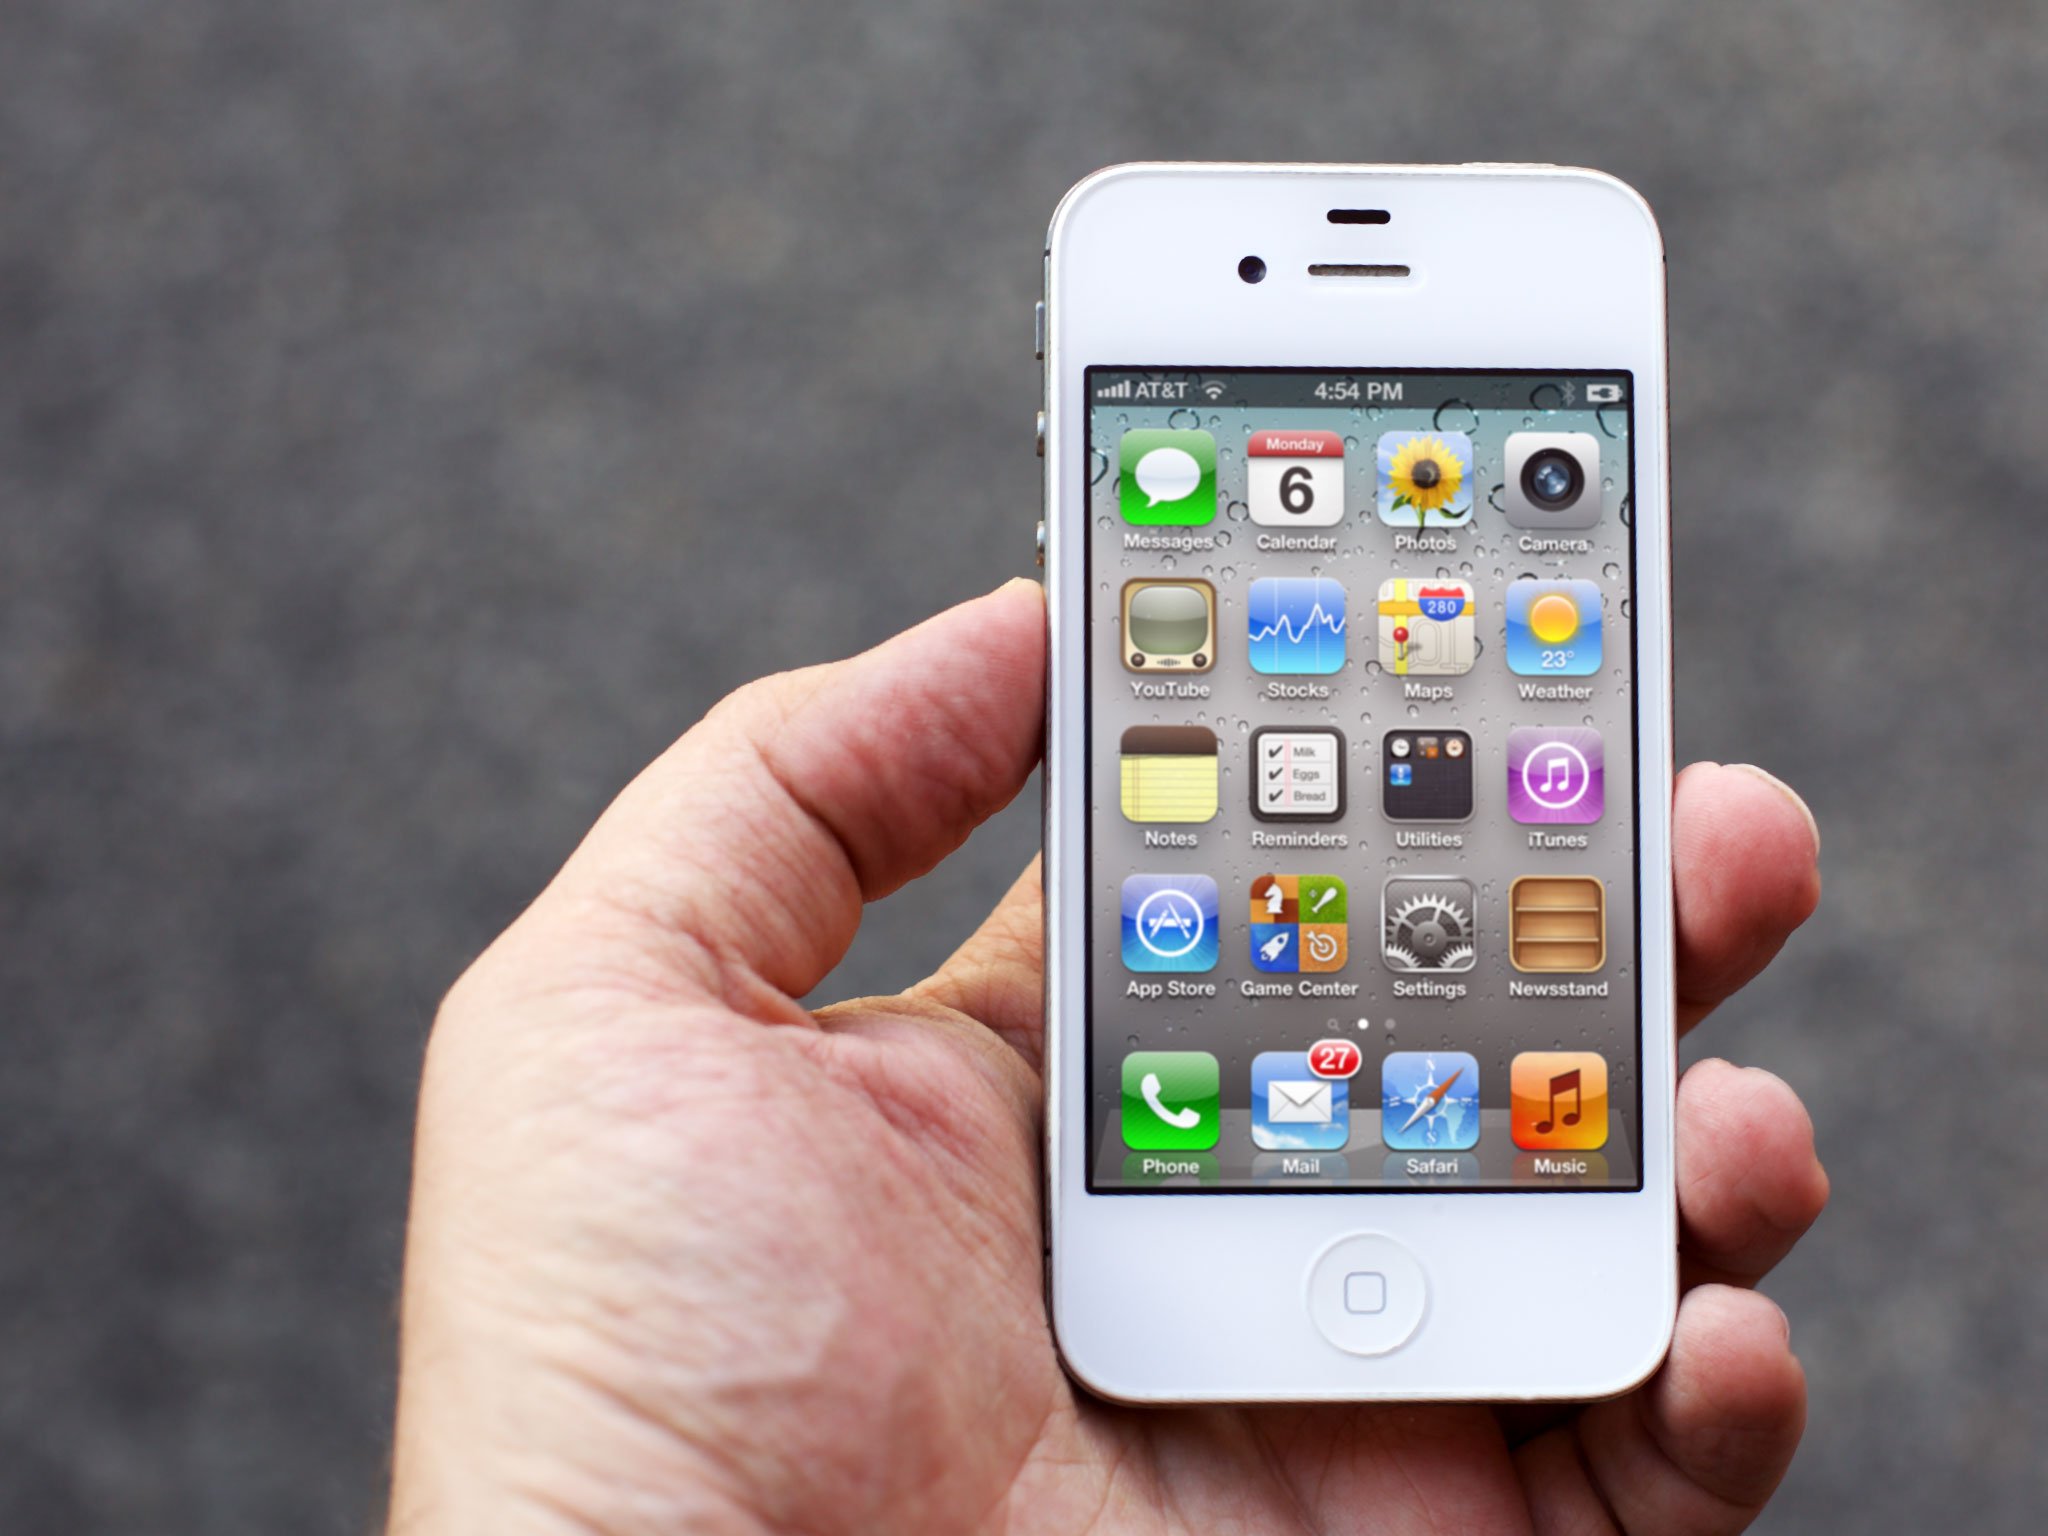 History of iPhone 4S: The most amazing iPhone yet